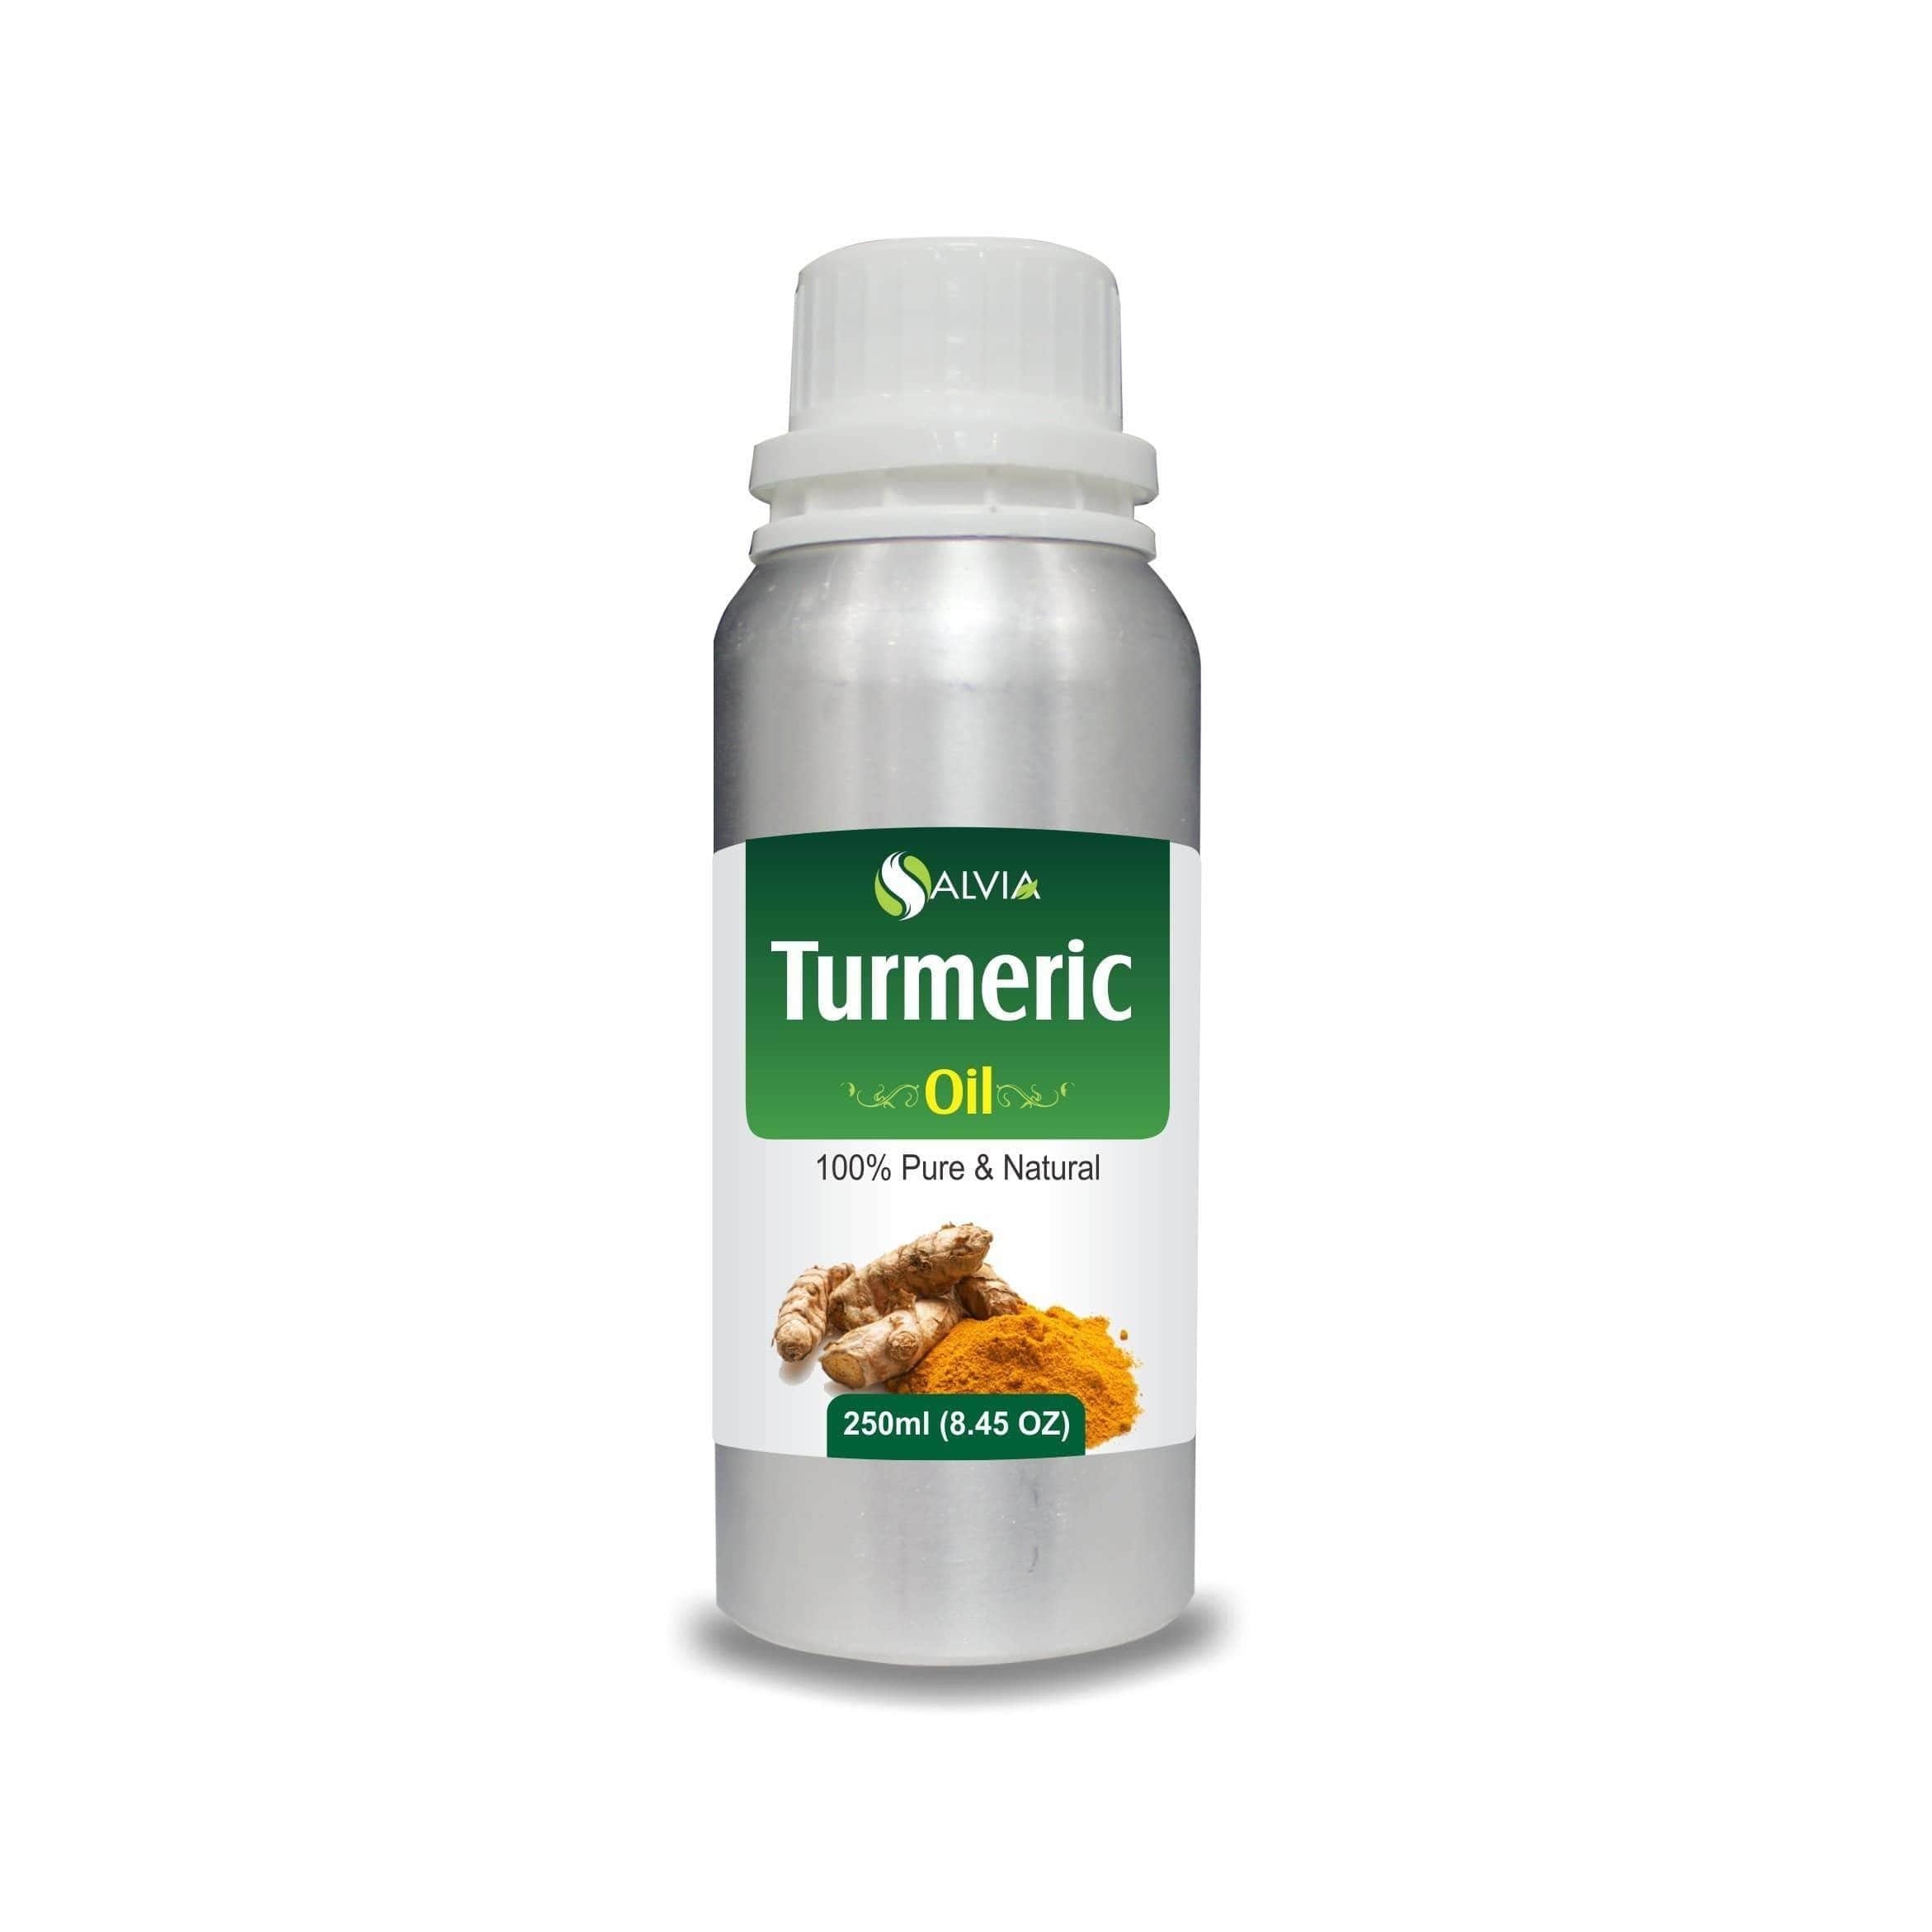 how to use turmeric oil on face